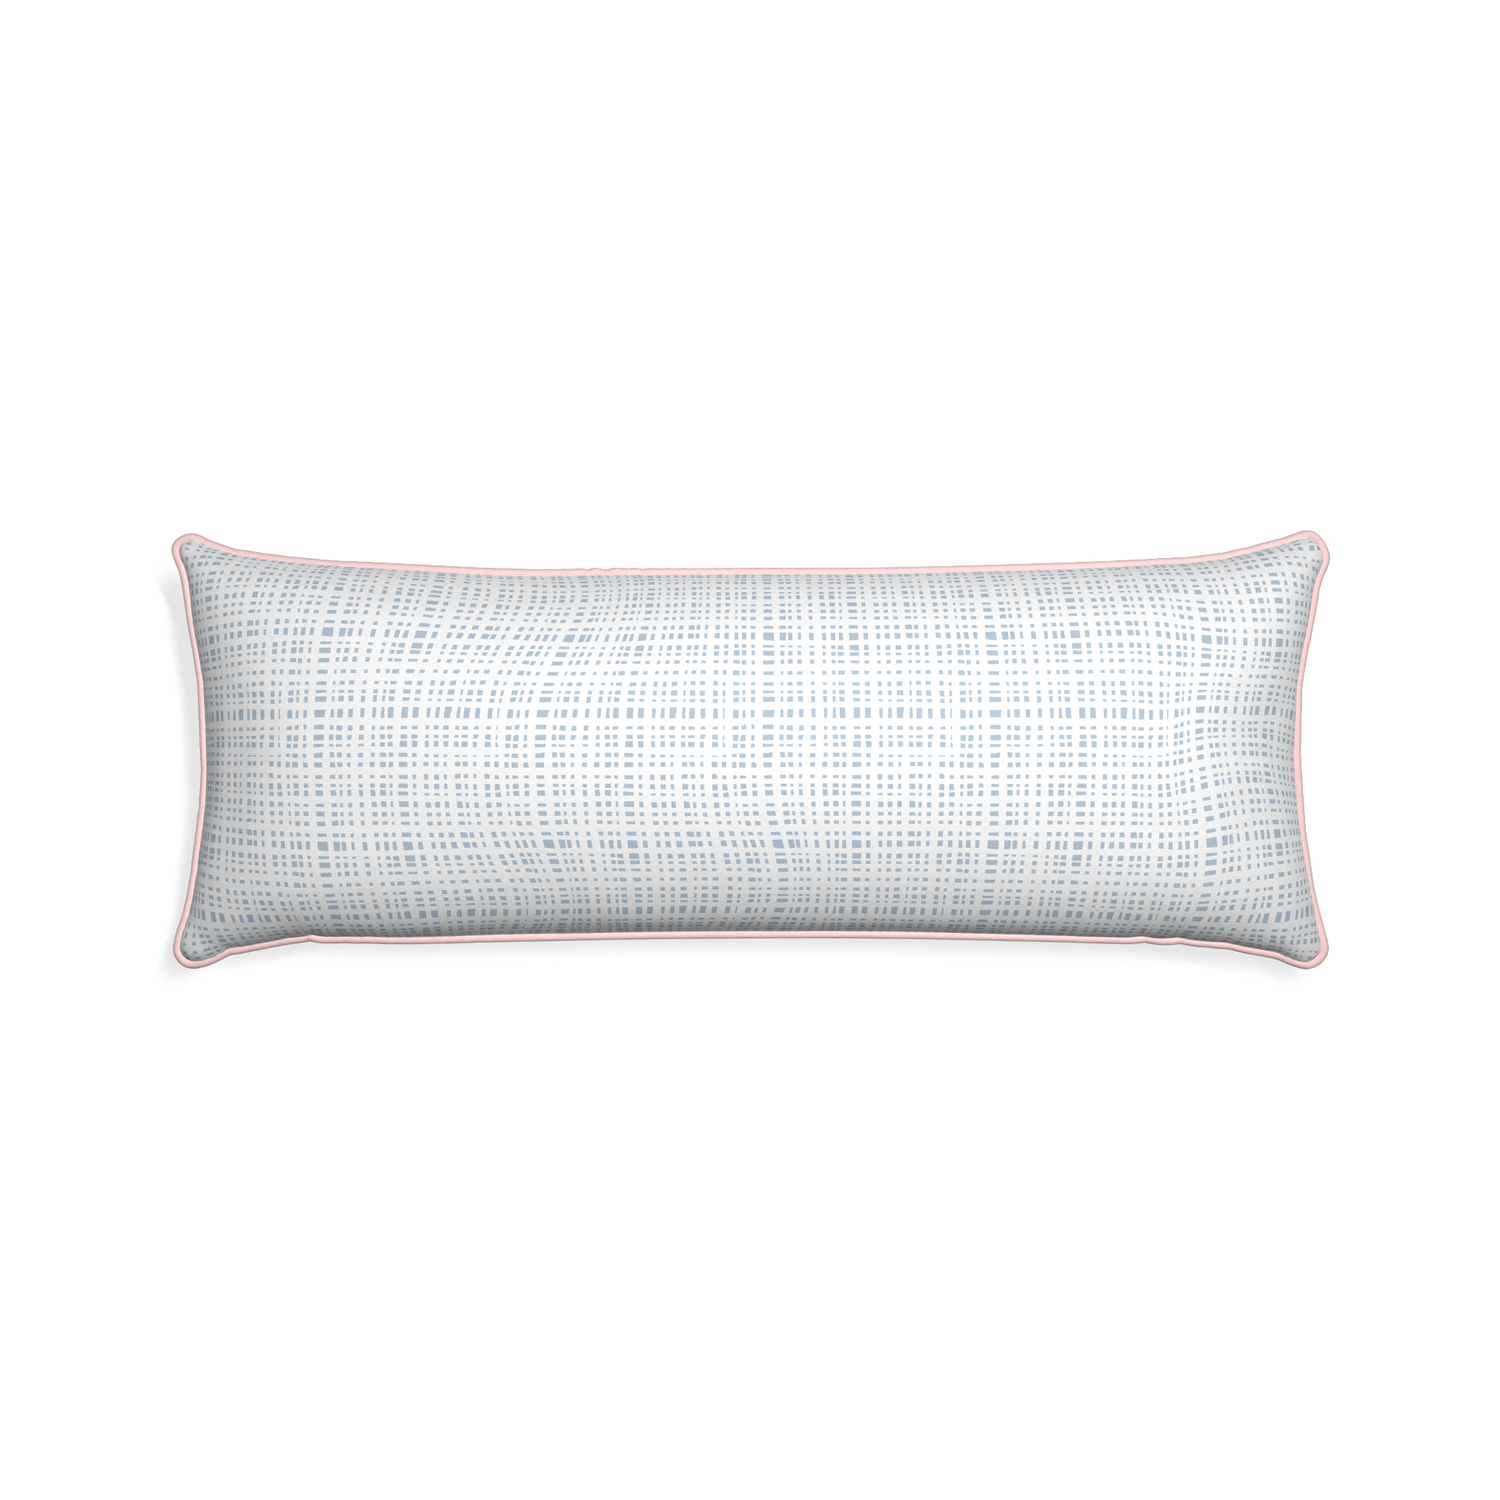 Xl-lumbar ginger custom plaid sky bluepillow with petal piping on white background